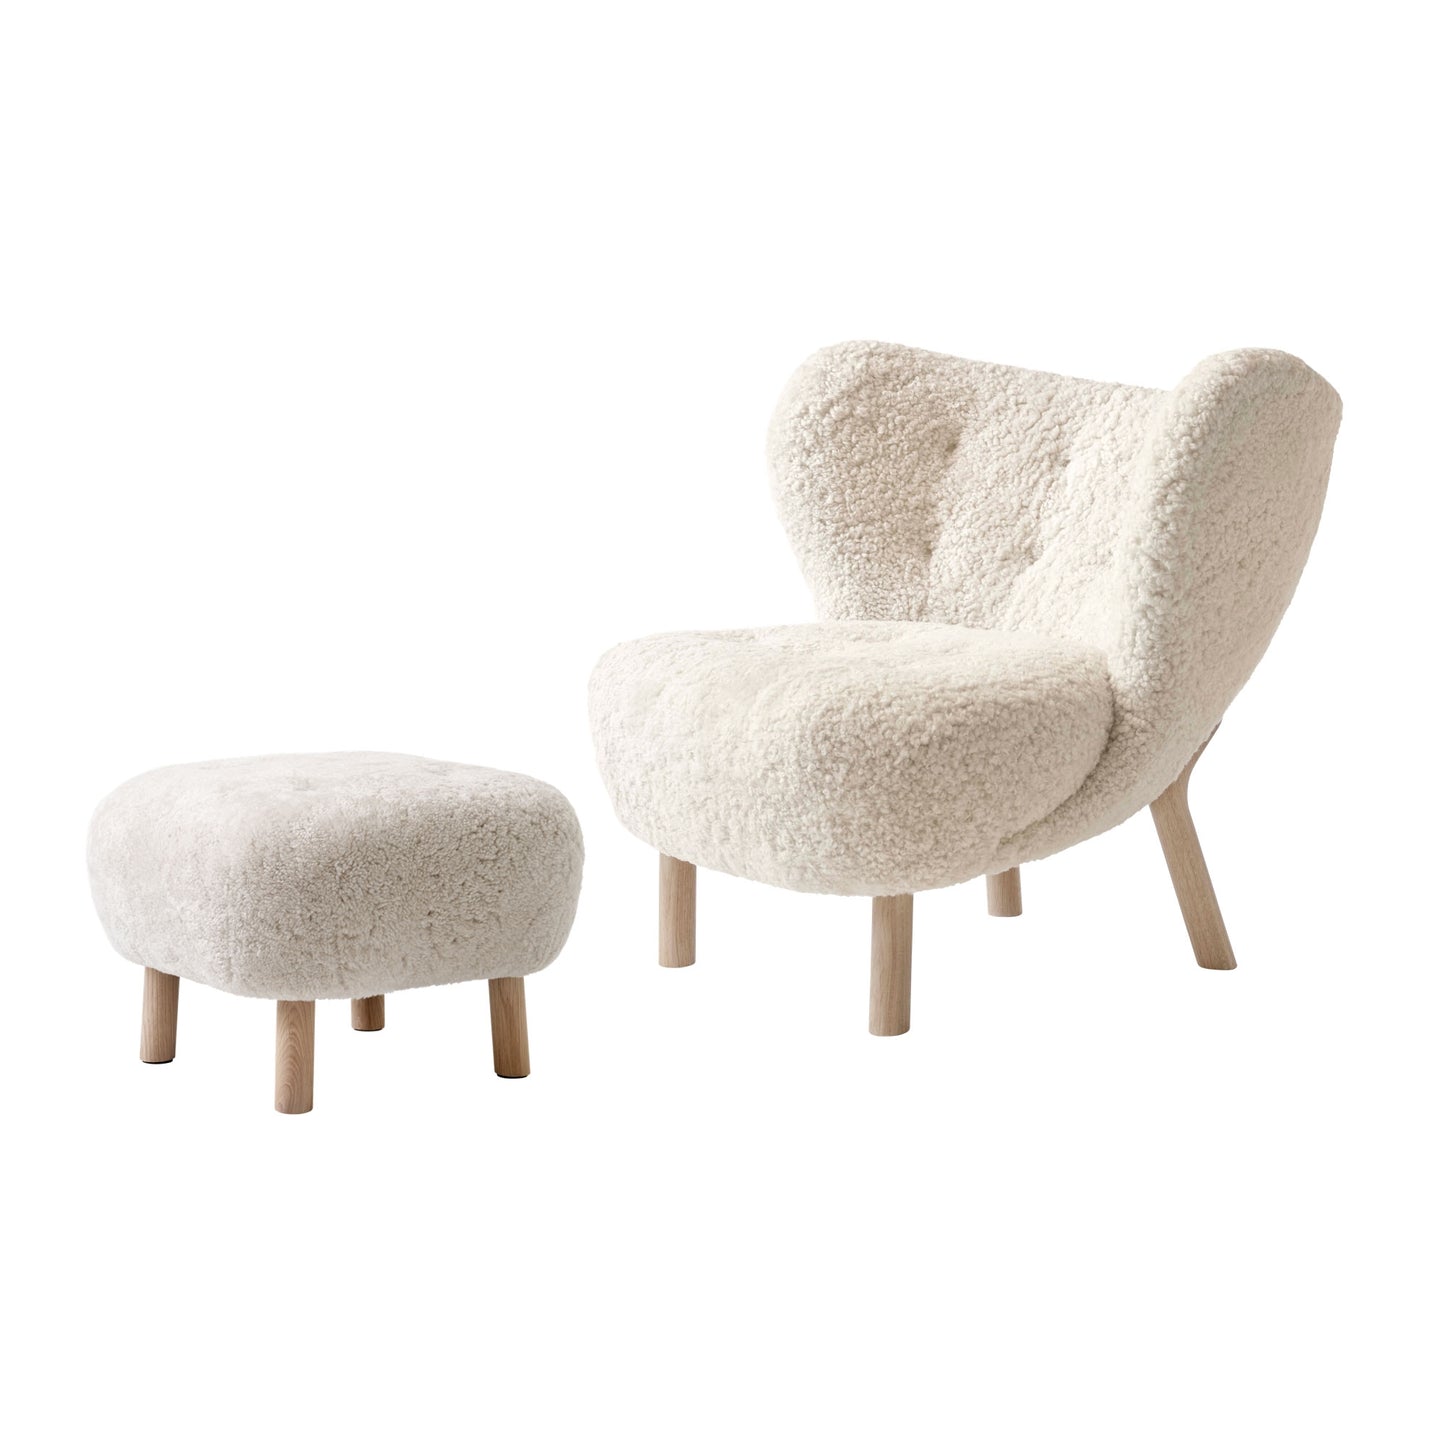 Little Petra VB1 Armchair with ATD1 Pouf by &tradition #Sheepskin Moonlight/White Oiled Oak